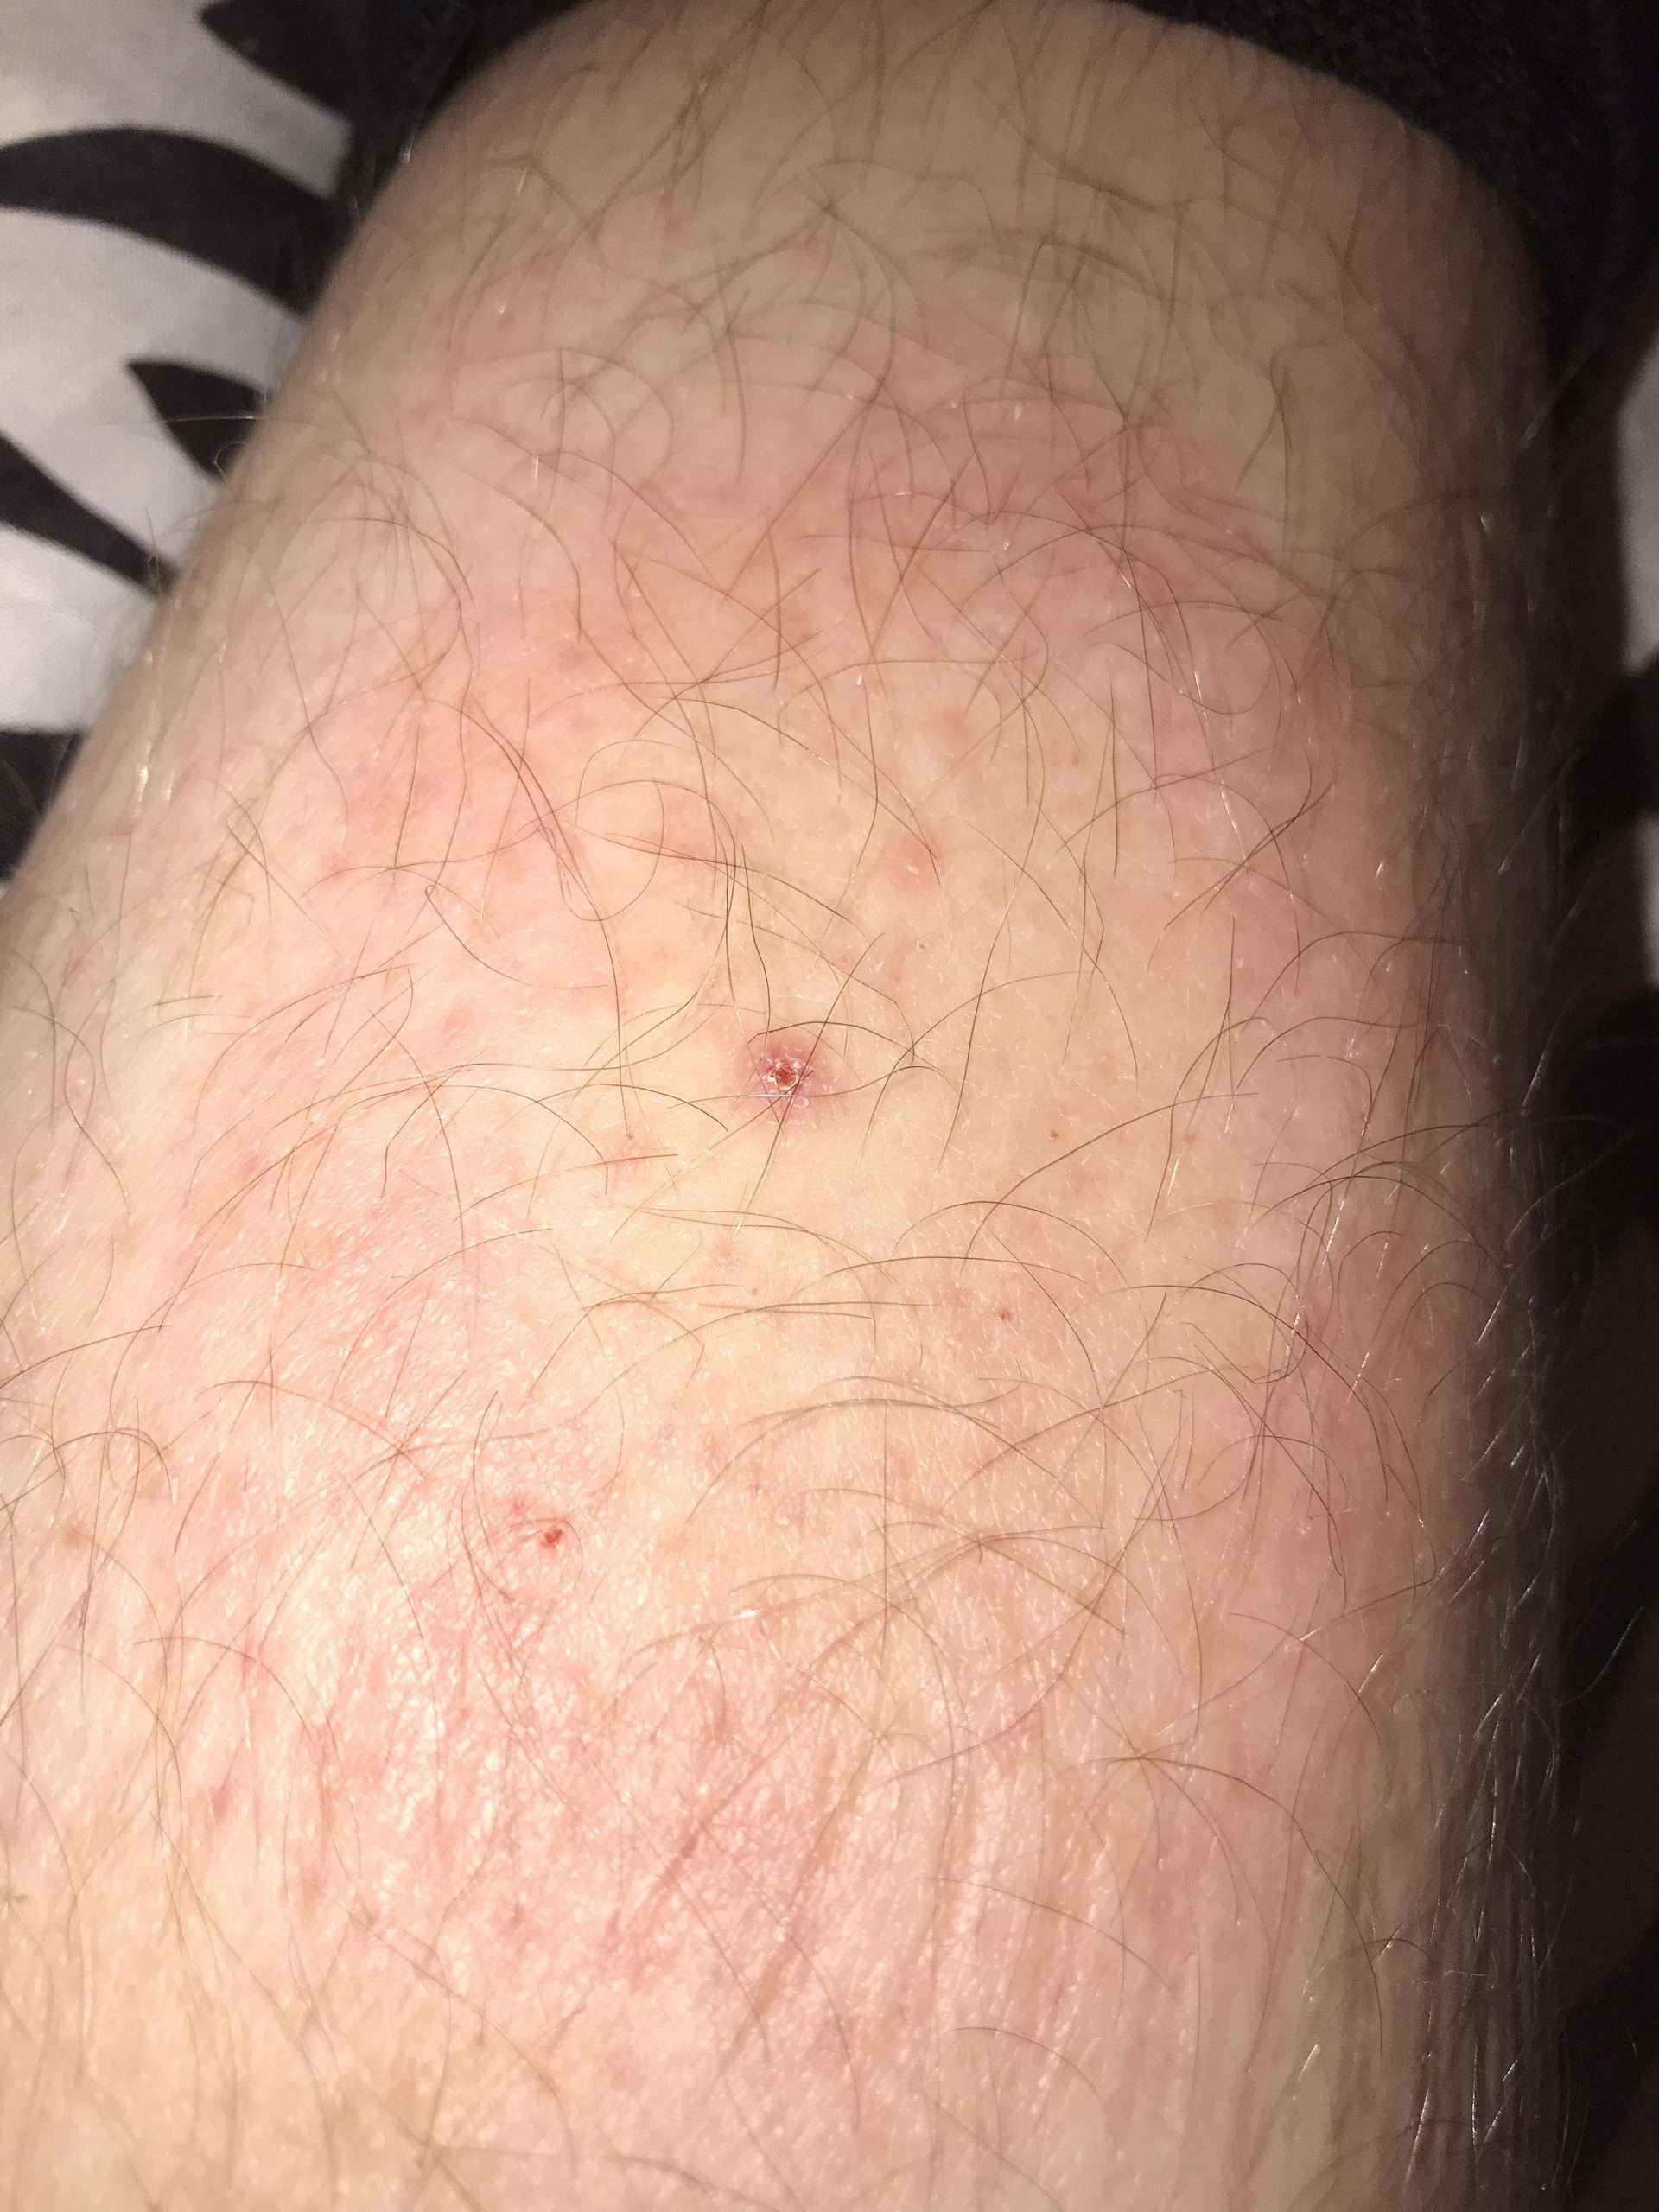 Help does anyone know if this is Lyme disease or some ...